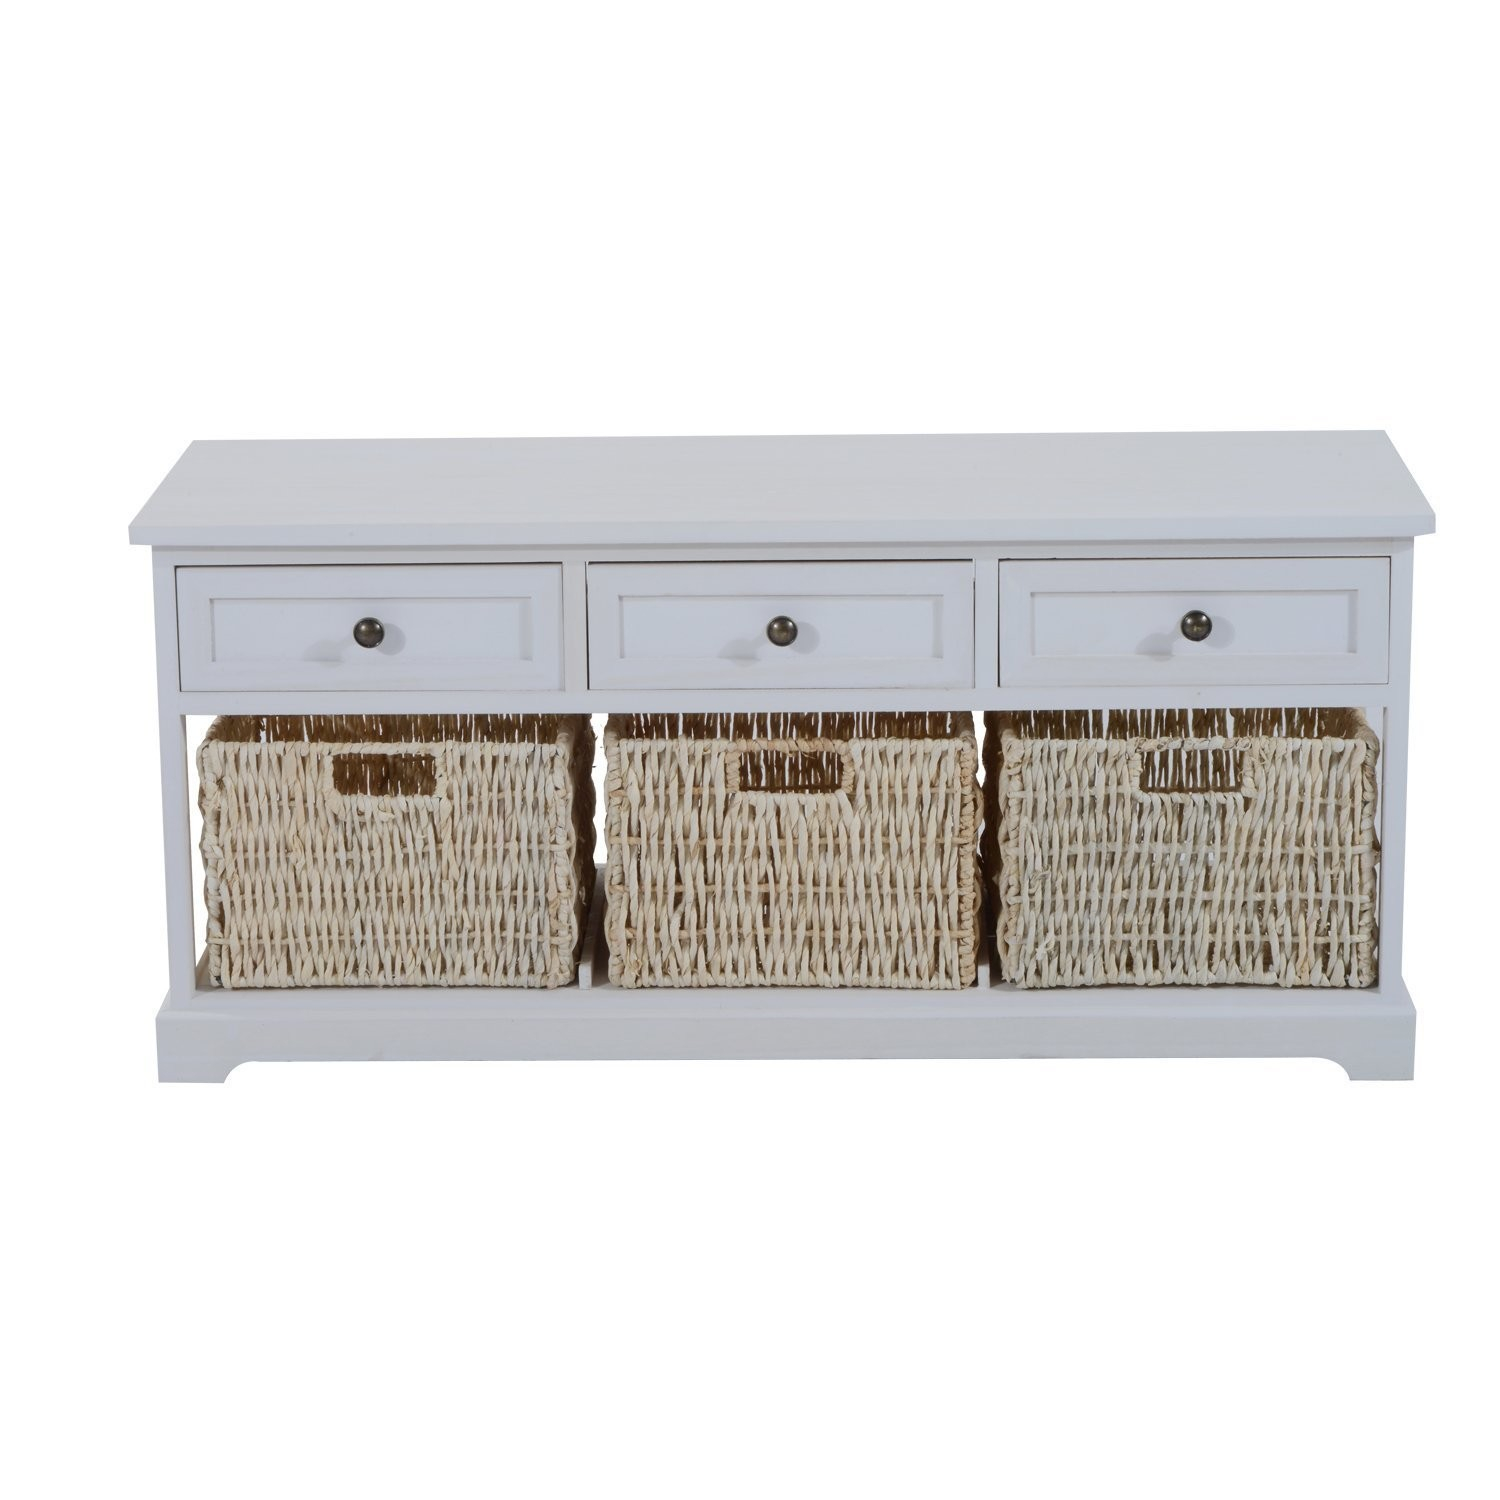 Wooden Coffee Table With Seagrass Wicker Storage Baskets Ideal regarding sizing 1500 X 1500